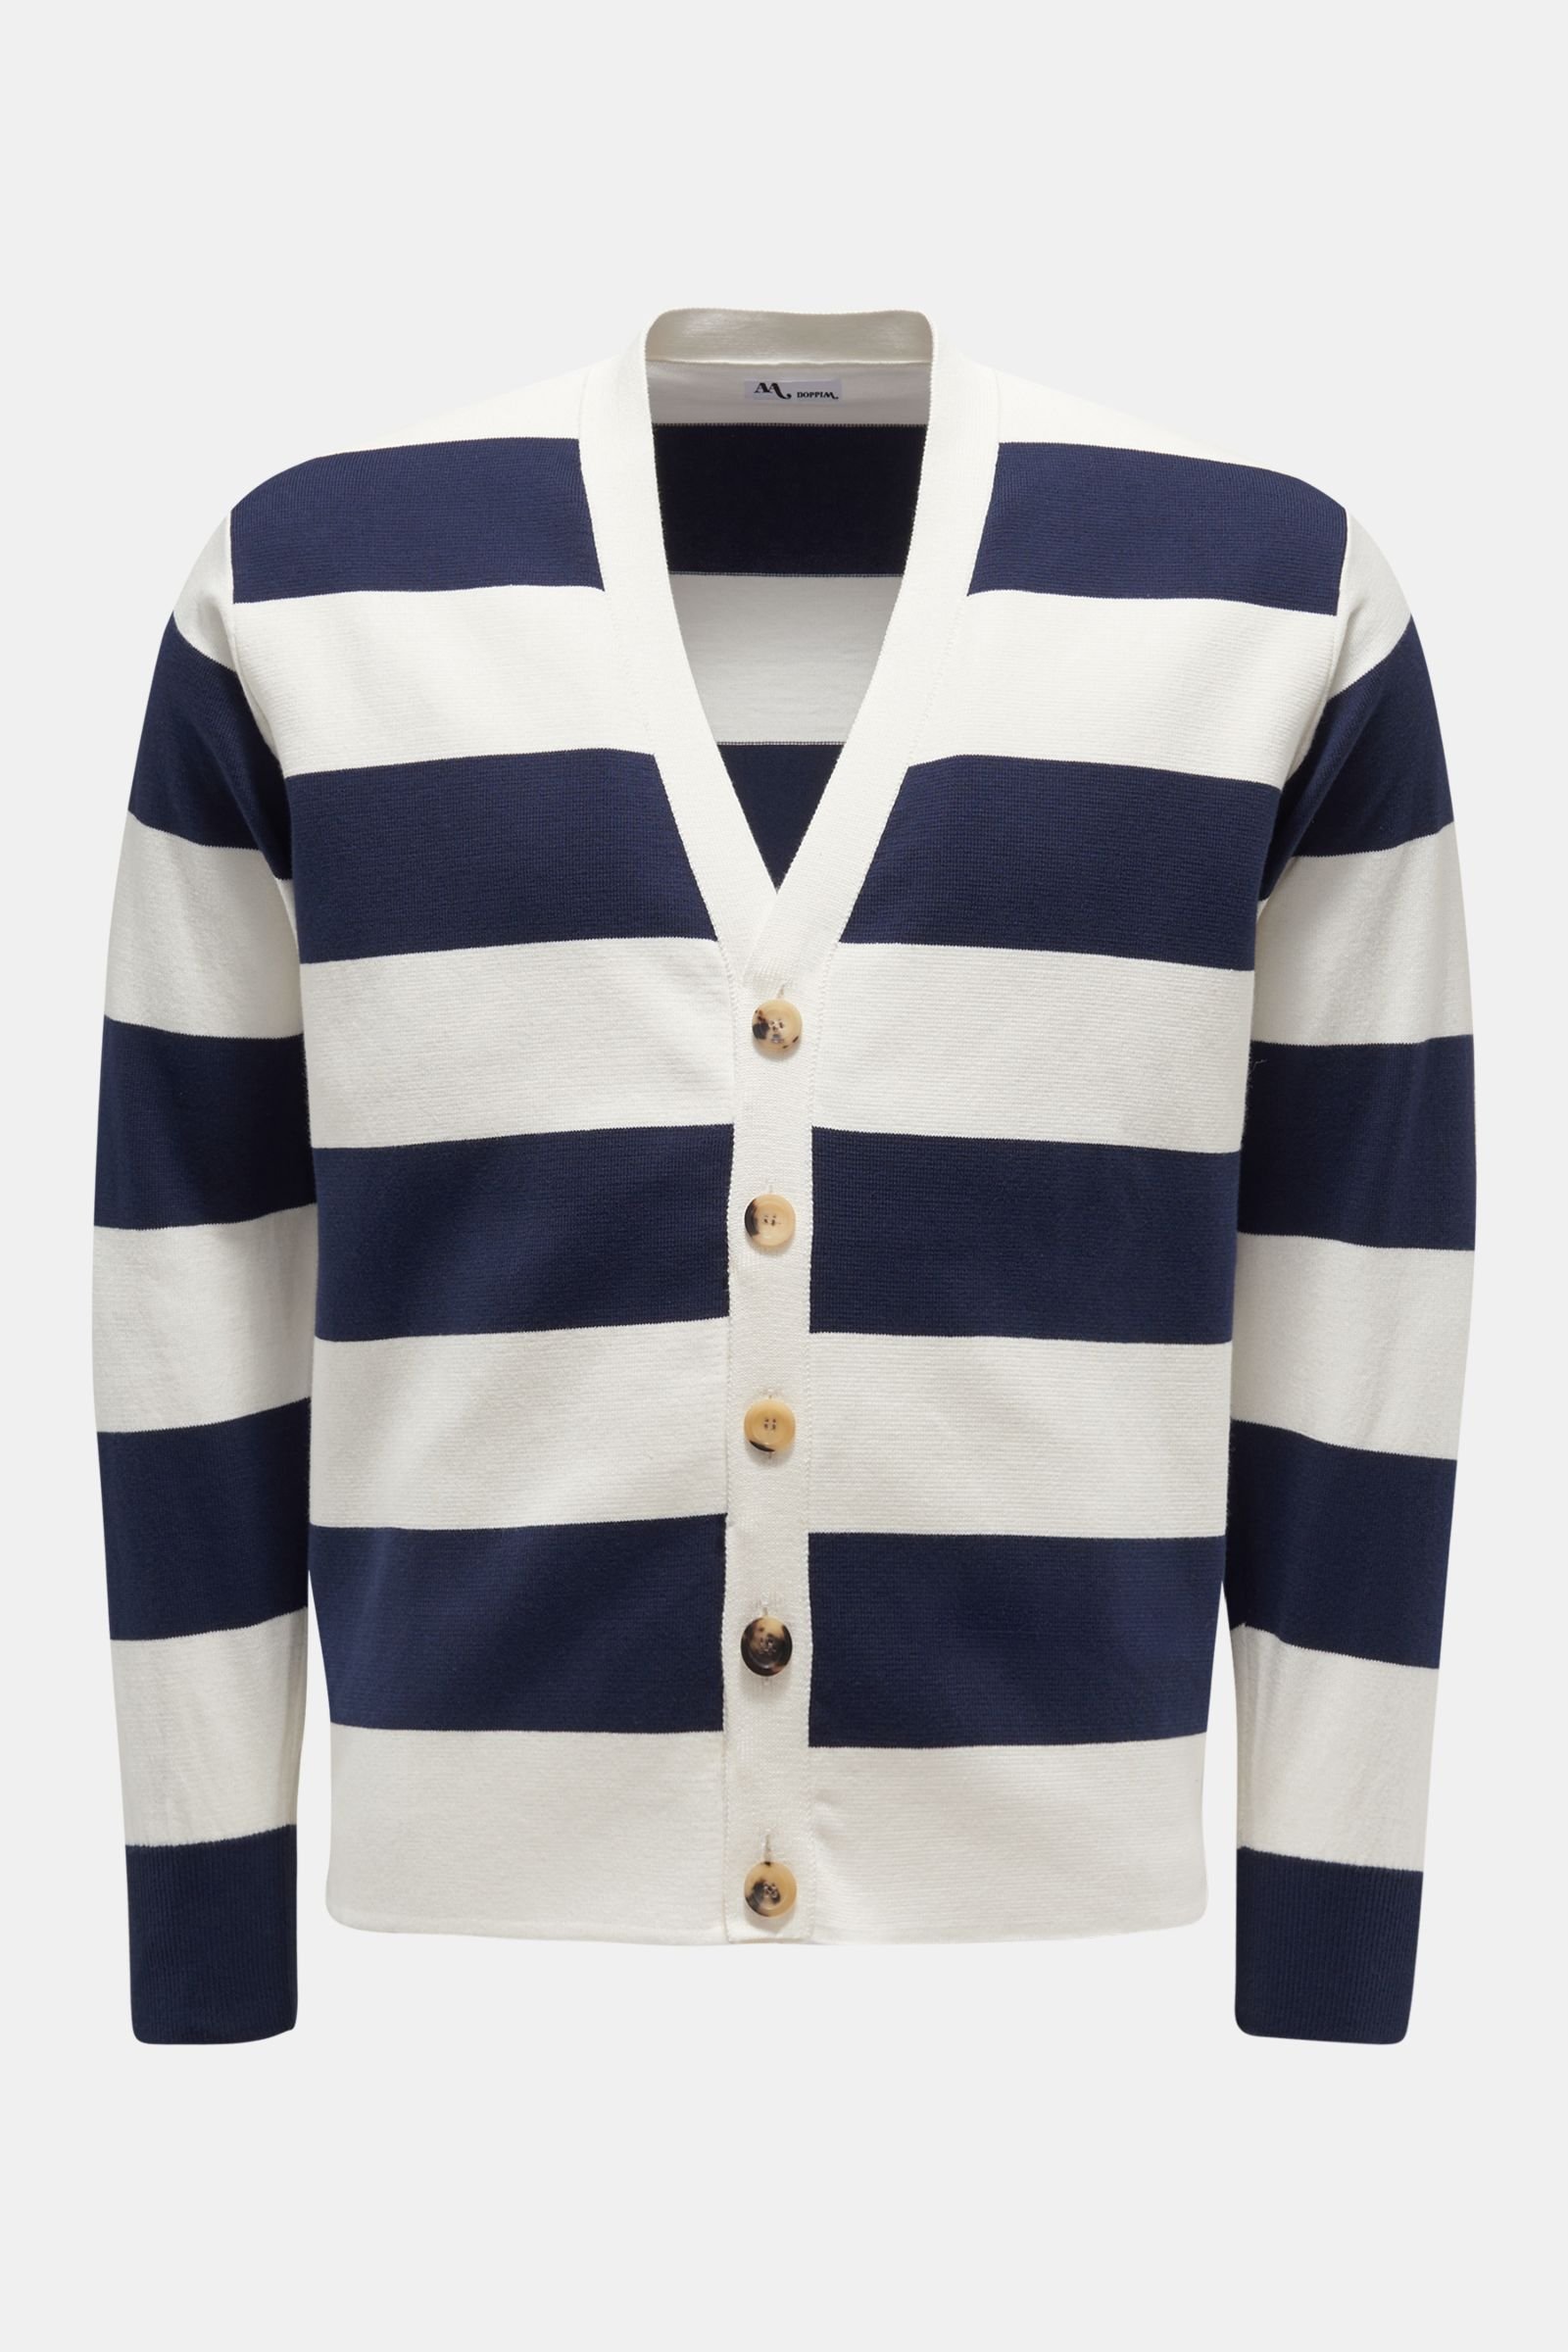 Cardigan 'Aanfitrione' navy/off-white striped